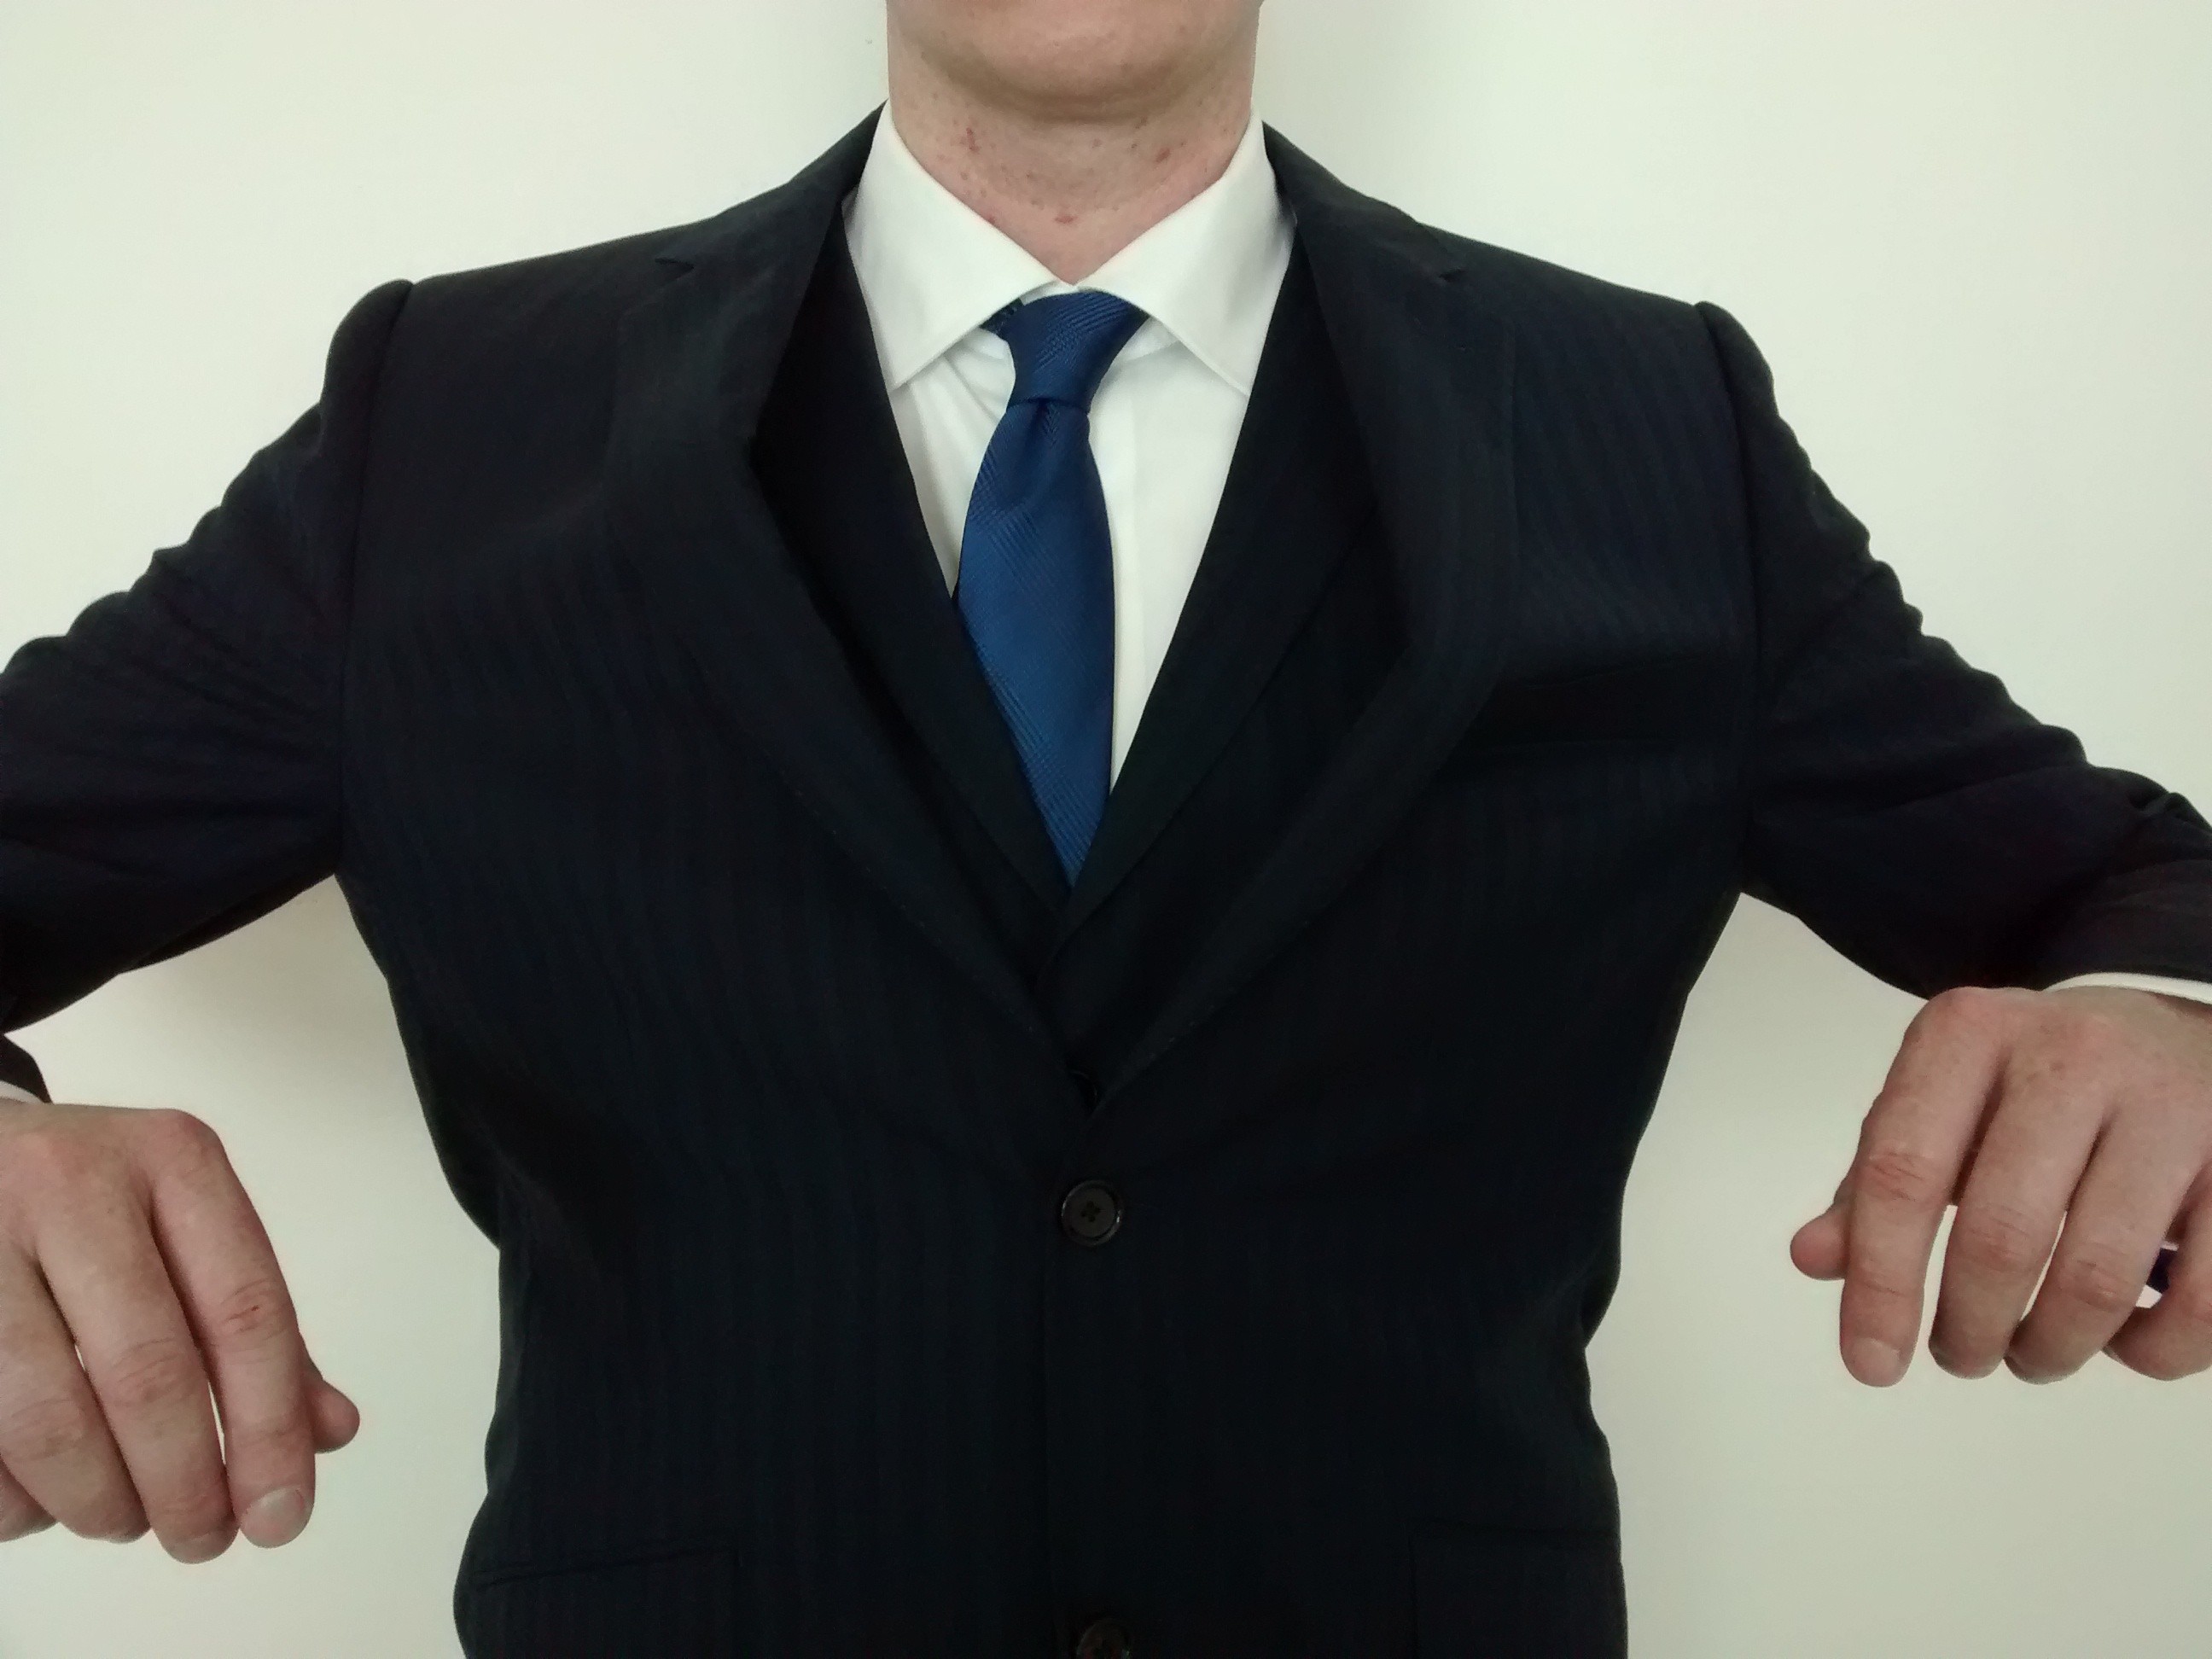 New Indochino suit fitting: alterations needed? | Styleforum